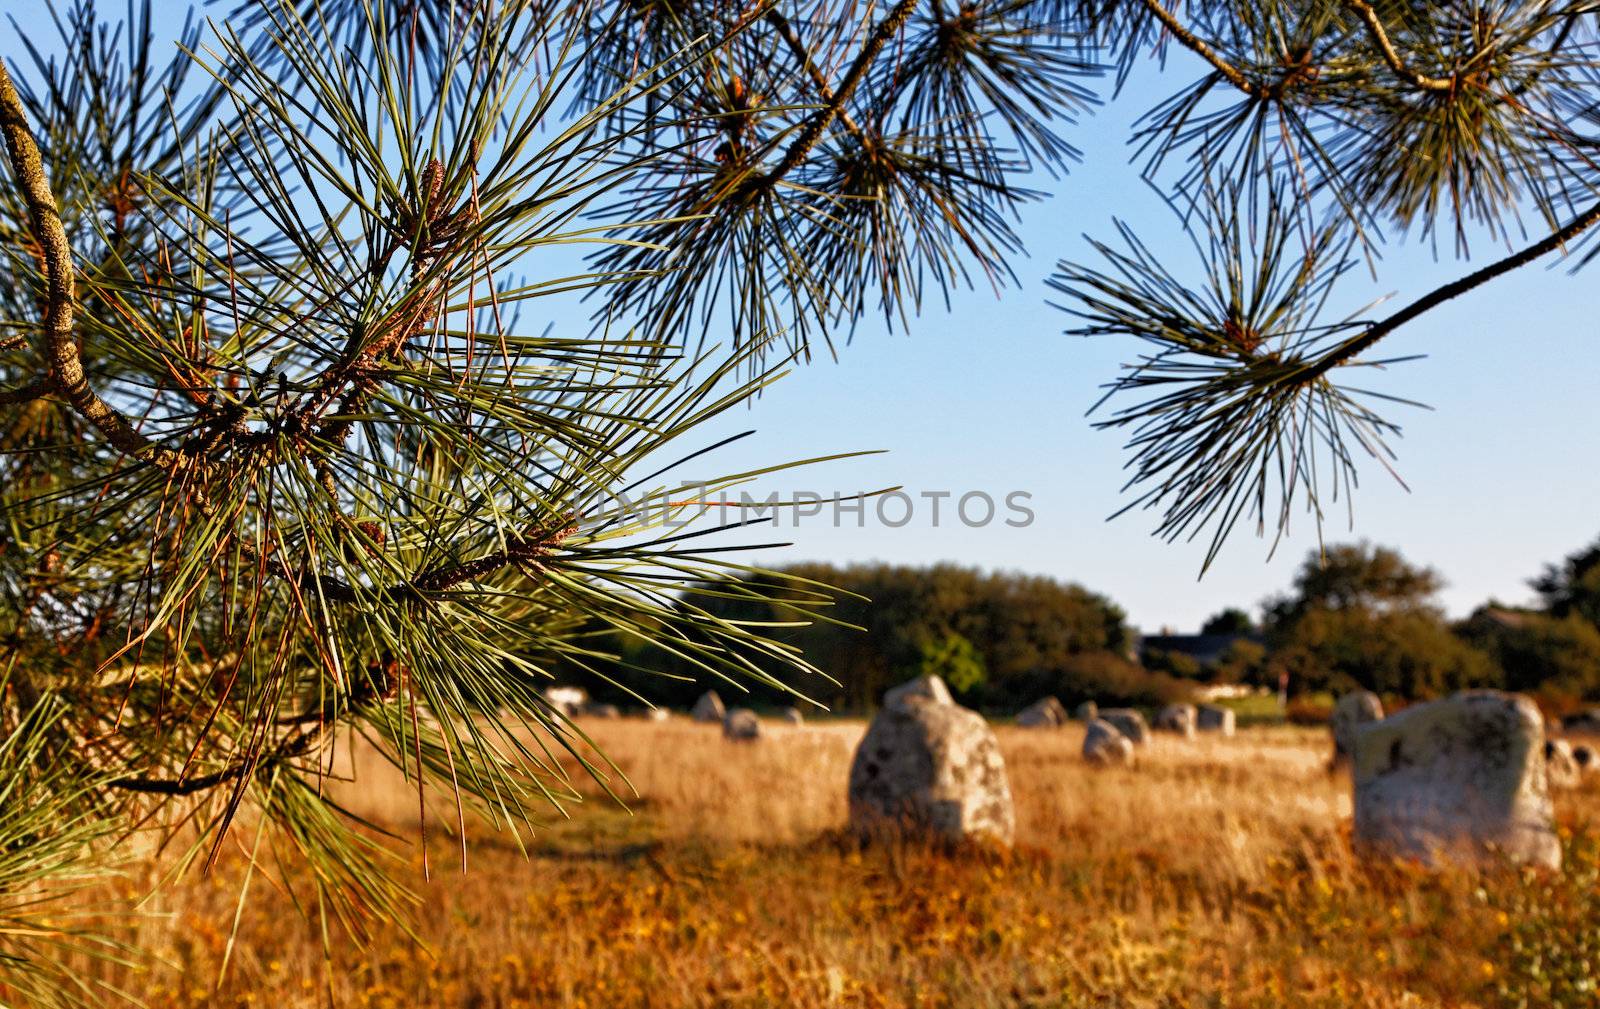 Image at the dusk of megalithic monuments menhirs ,framed by some pine branches, in Carnac,  Brittany in nortwest of France. The focus is selective on the tree.